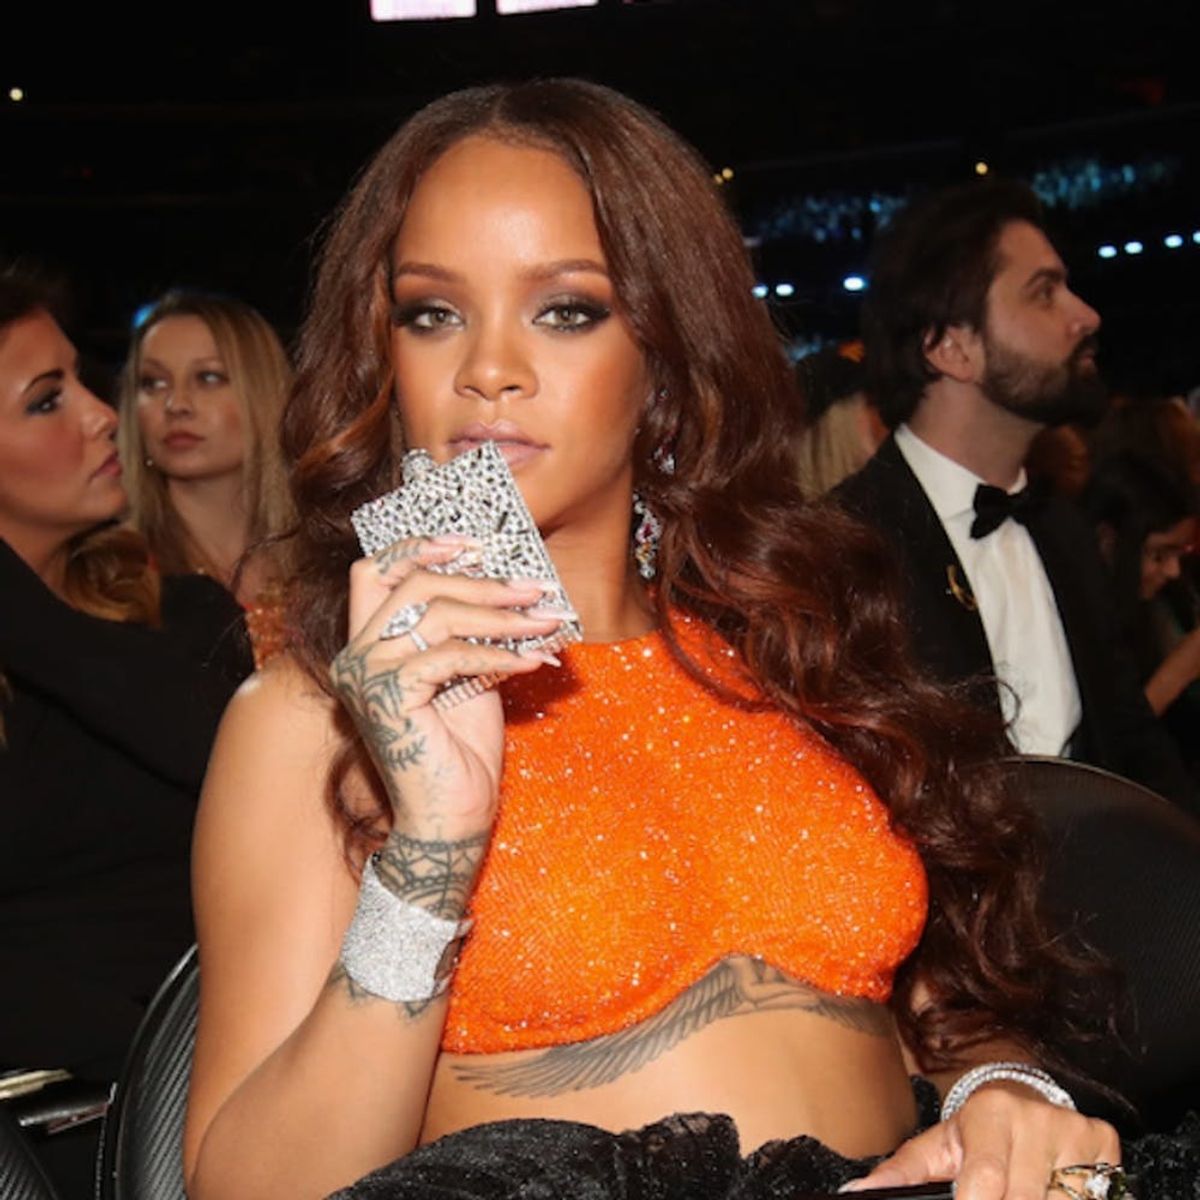  Here’s What Rihanna Eats According to Her Personal Chef